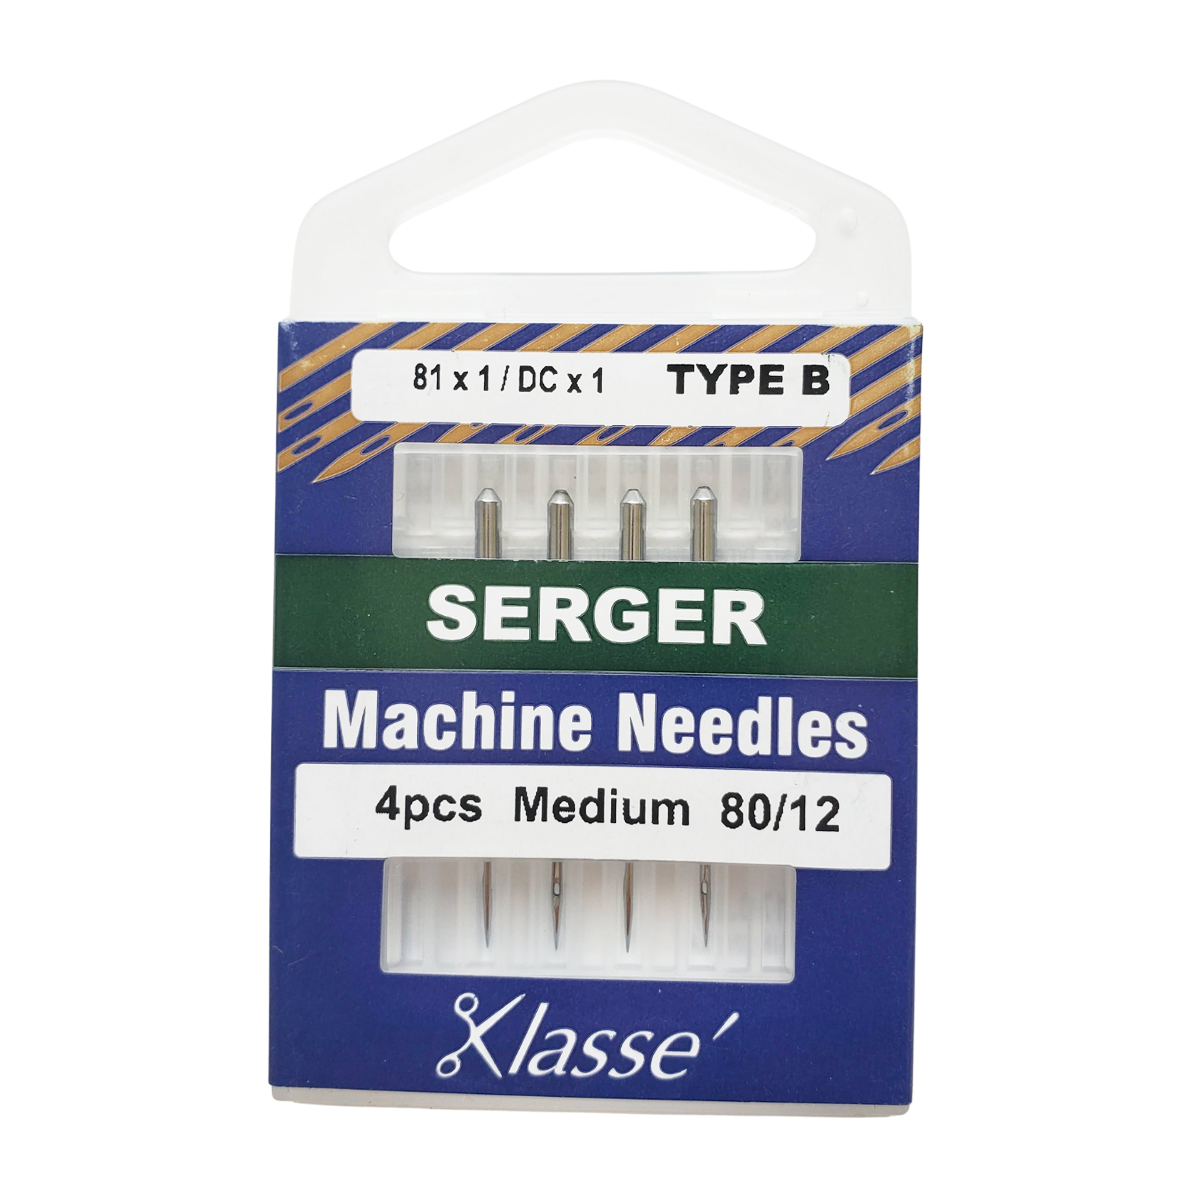 Ball Point and Universal Sewing Machine Needles Assorted Size Combination Pack, Perfect for Cotton, Jersey, and Knits Fabrics, Fits Singer, Brother